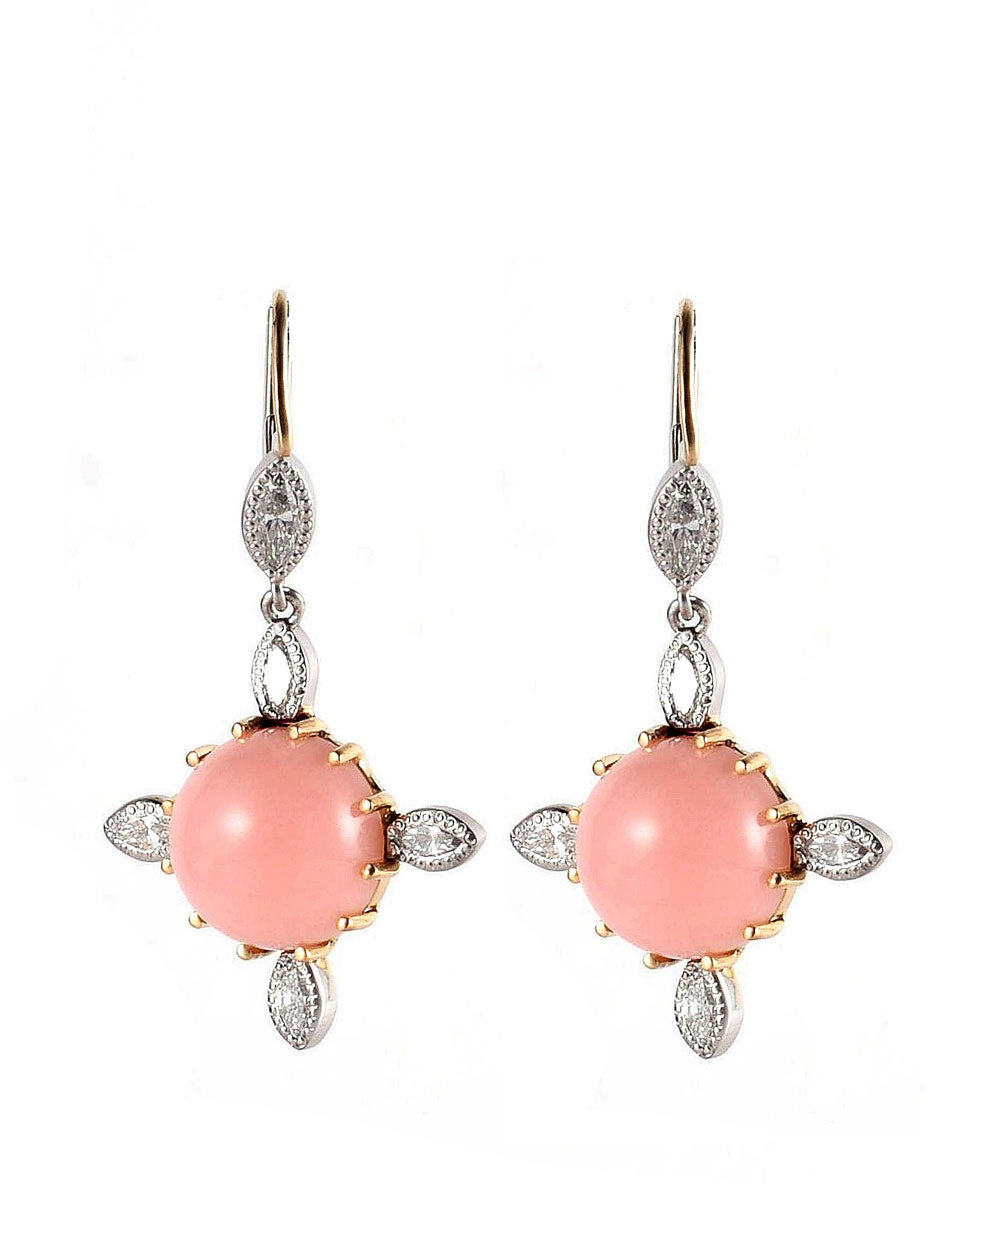 18k Gold and Platinum Pink Opal and Marquise Diamond Earrings